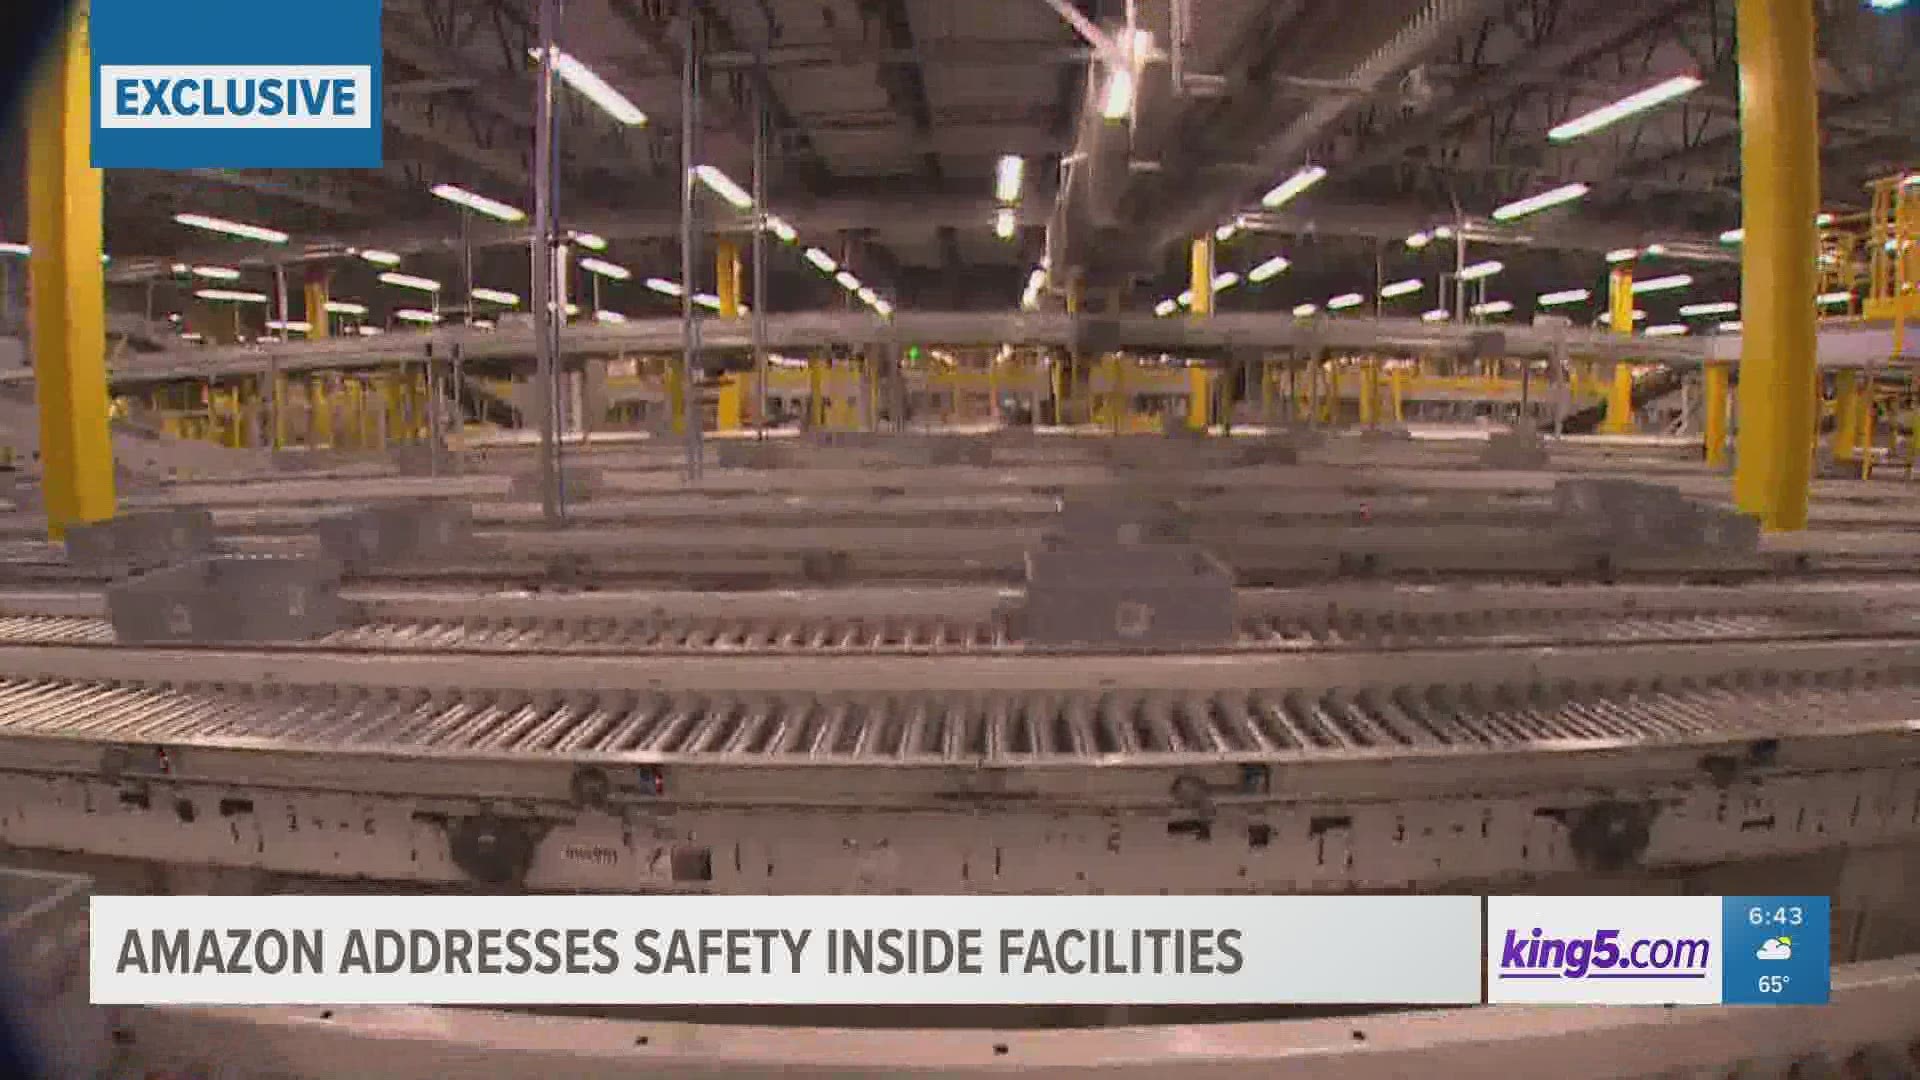 KING 5 took a tour of the Kent fulfillment center to see exactly what kind of improvements Amazon is making for its workers.